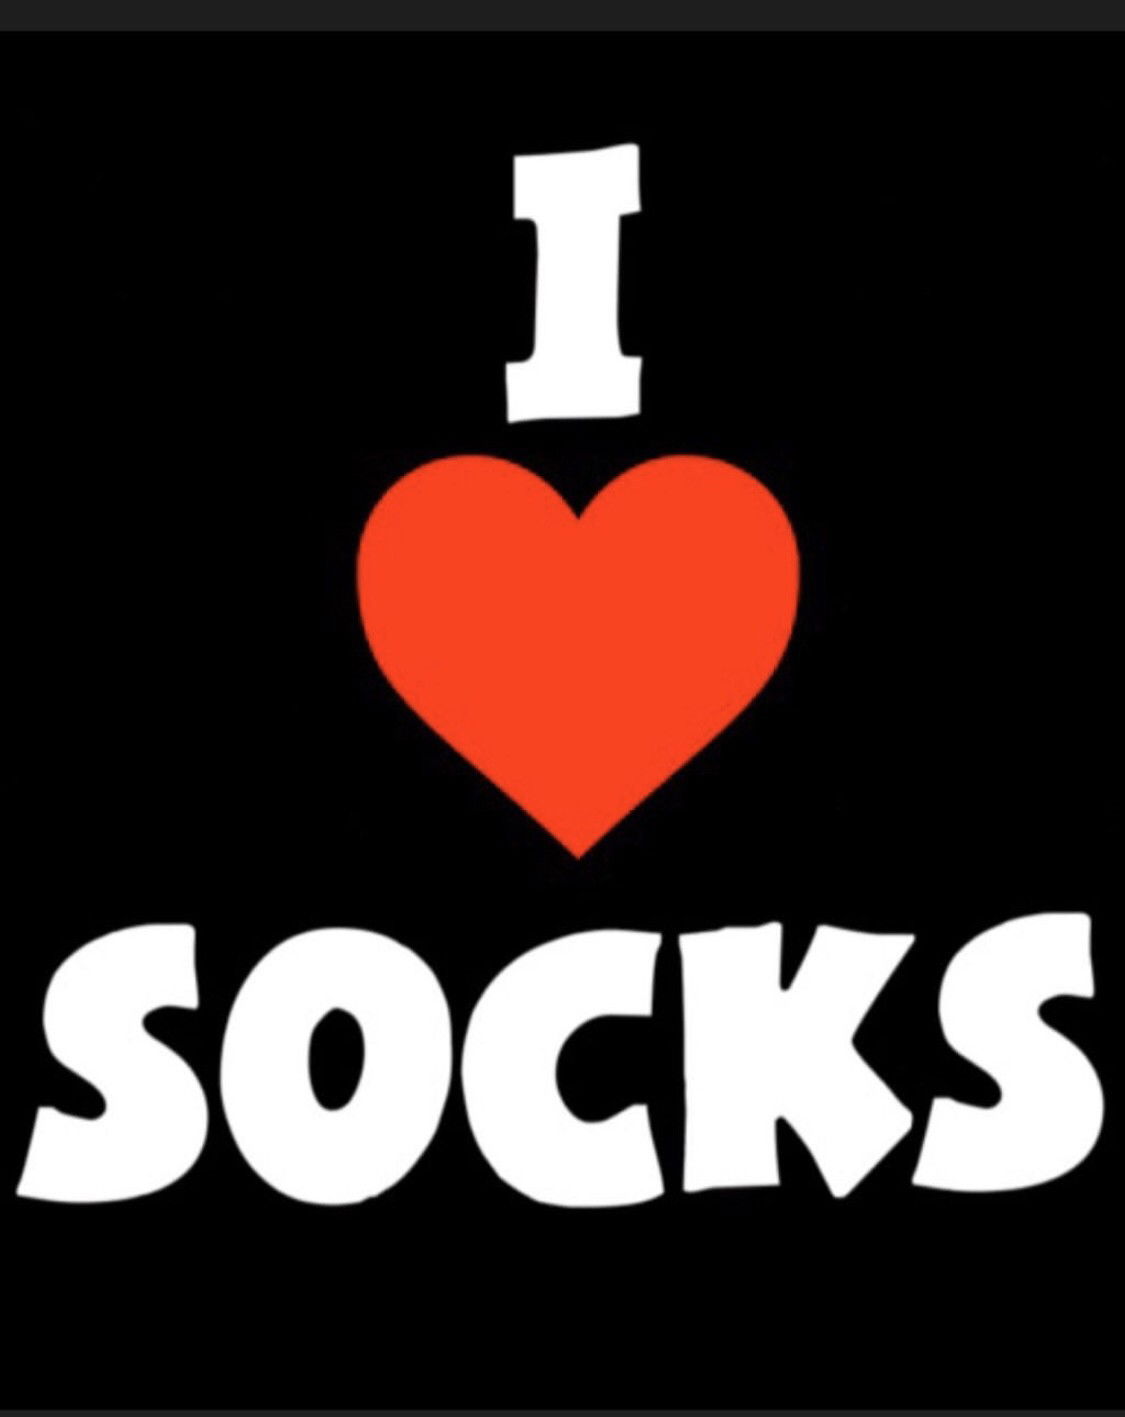 Photo by sox luv 420 with the username @sox_luv_420,  March 15, 2020 at 4:58 AM. The post is about the topic Hot Girls in Socks